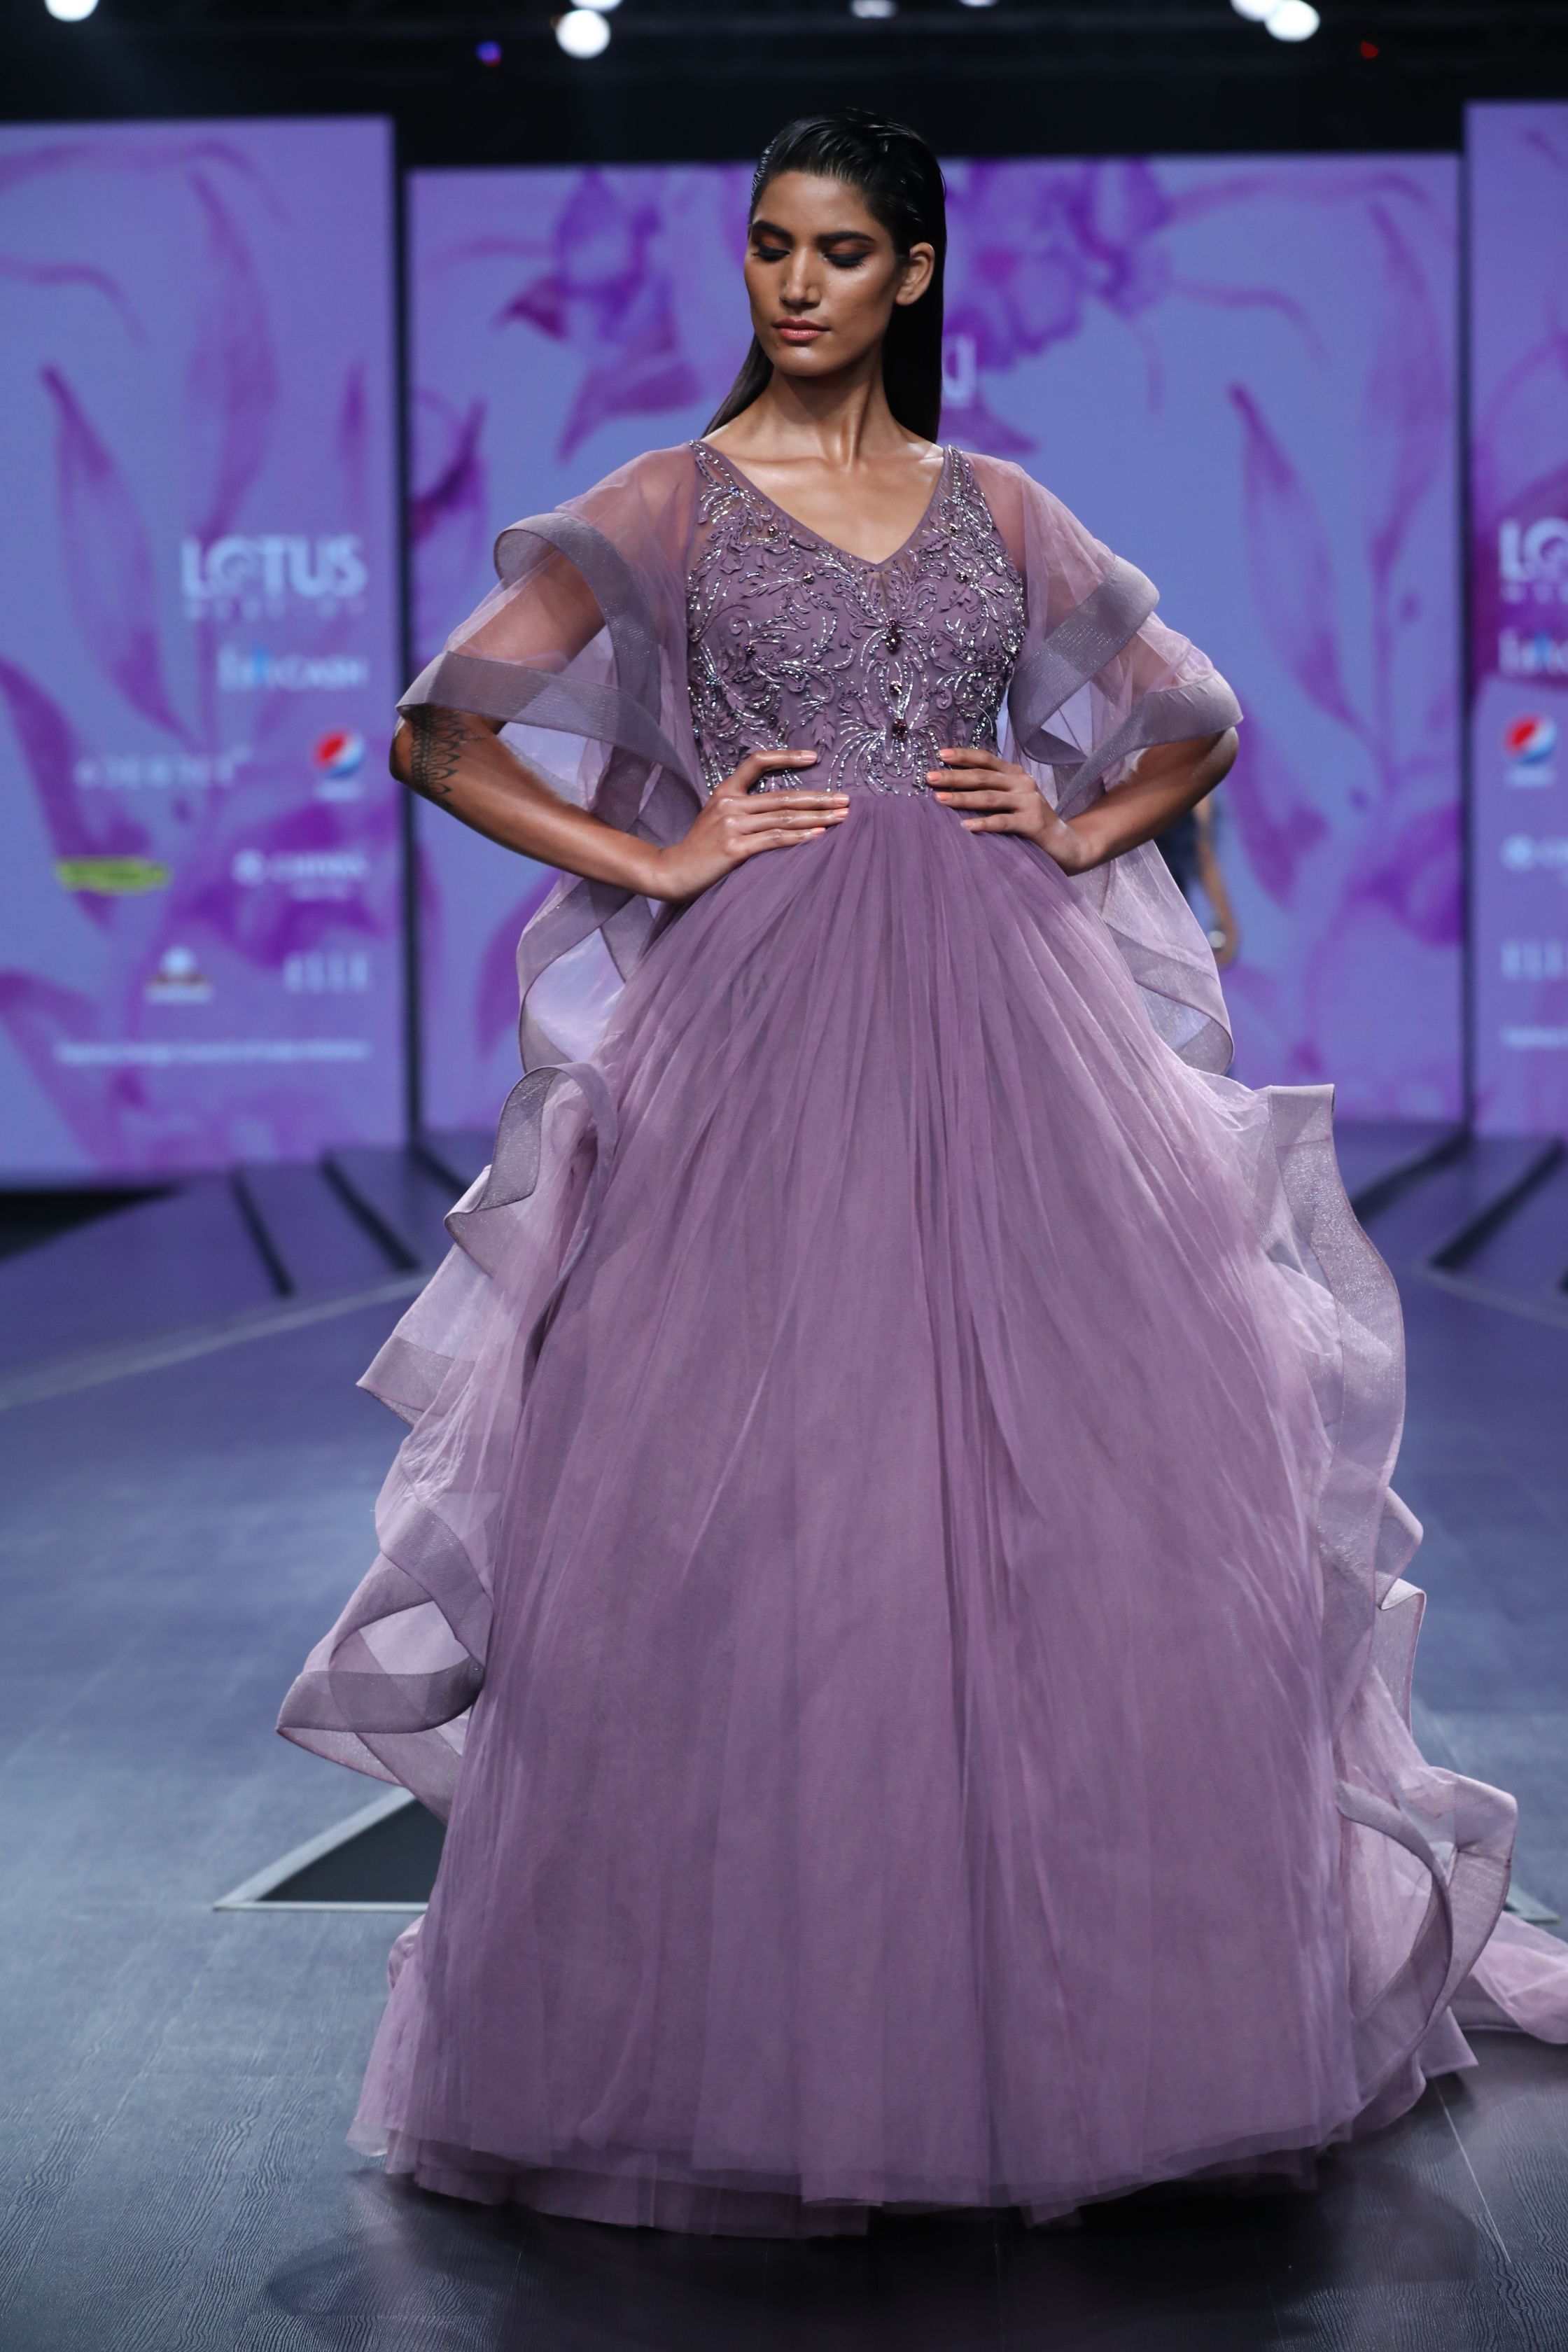 Amit GT - Lavender applique ruffled ball gown by amit gt